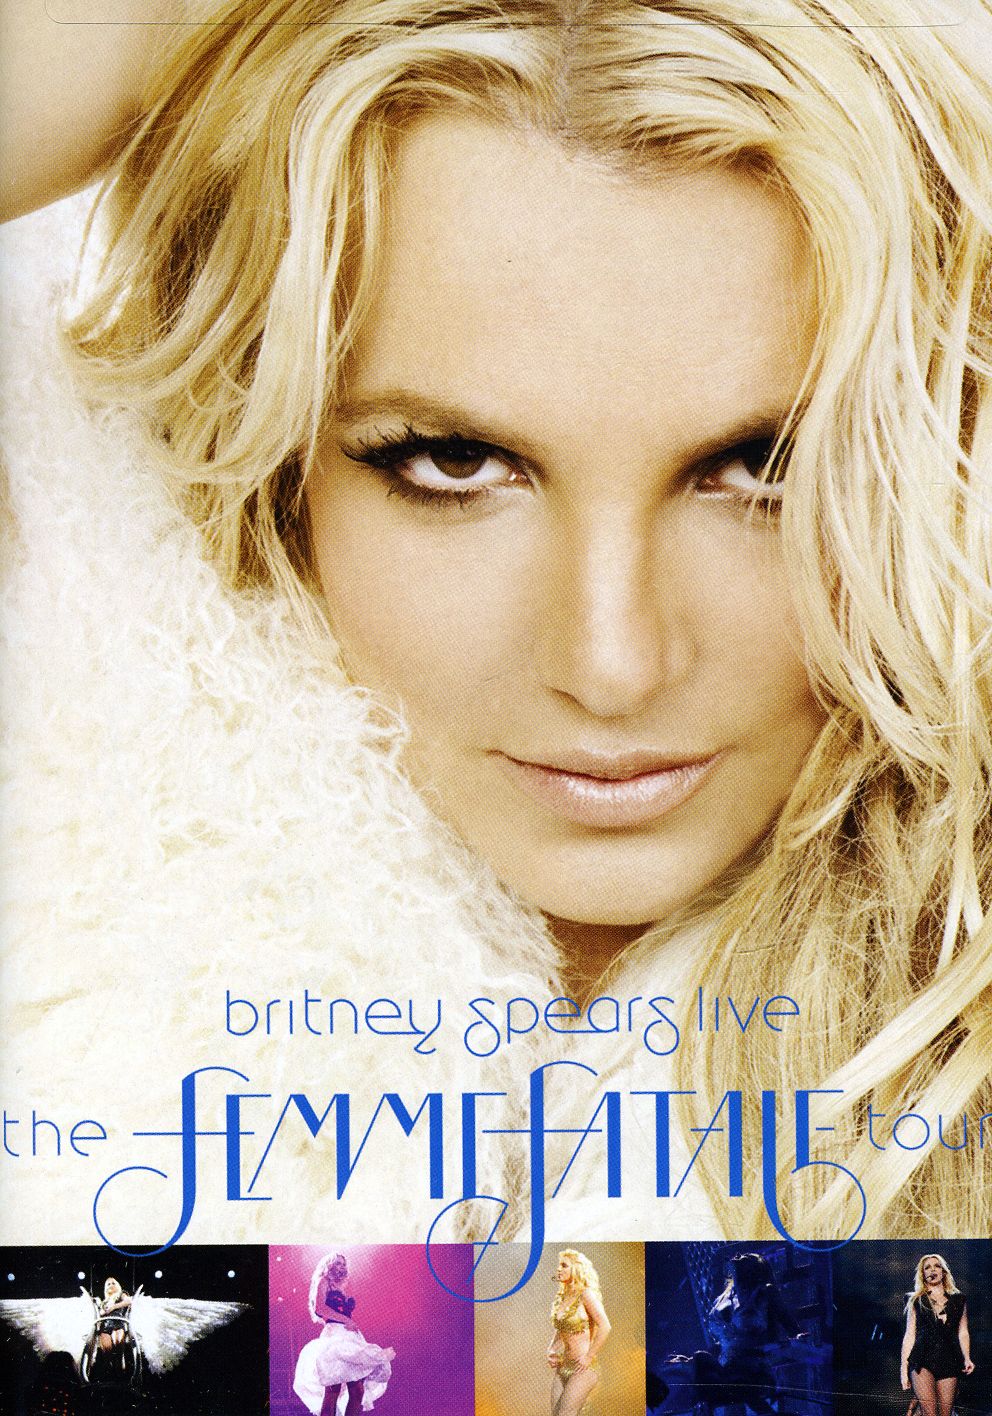 BRITNEY SPEARS LIVE: THE FEMME FATALE TOUR